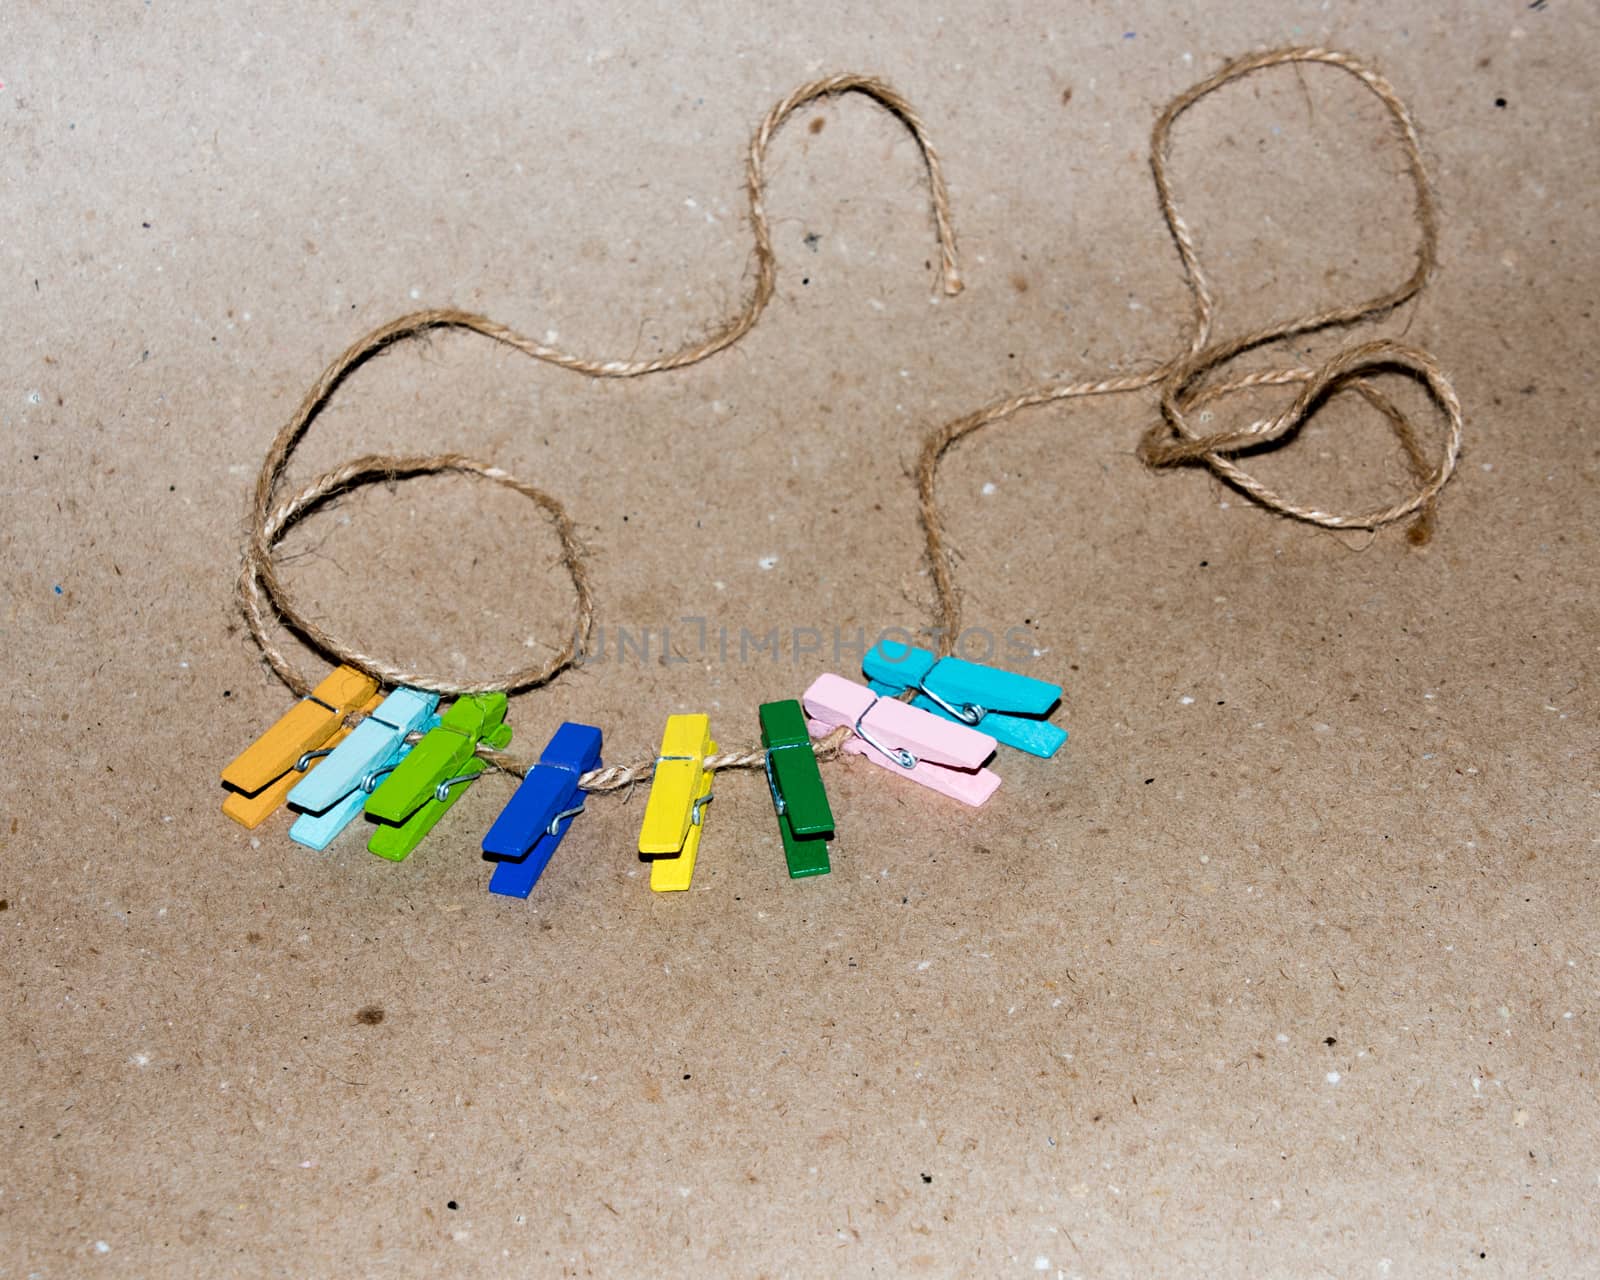 Colorful wooden clothespin. Background of colorful clothes pegs. Closeup of colorful clothespins.

